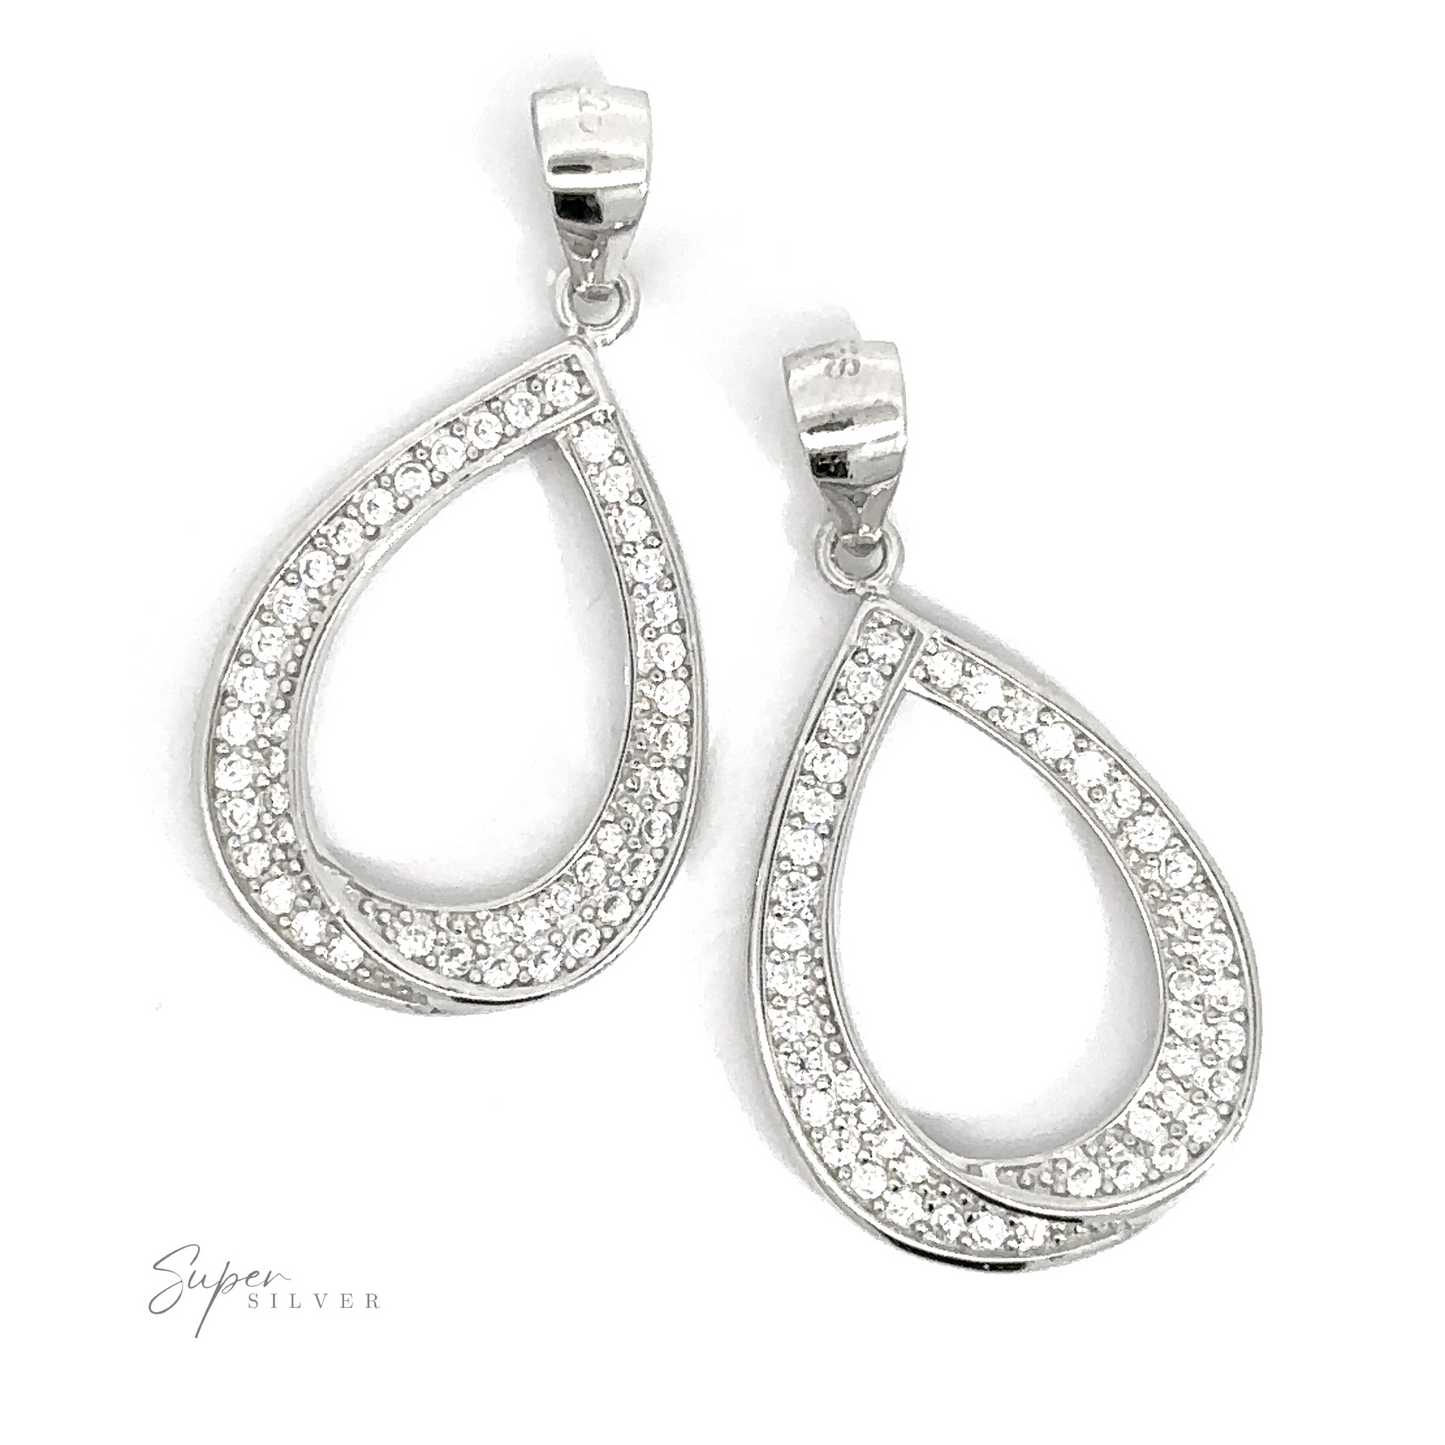 
                  
                    Two teardrop-shaped Sterling Silver earrings with a row of small, sparkling stones around the edges, showcasing fine craftsmanship and elegant design.

Teardrop Shape Cubic Zirconia Pendant
                  
                